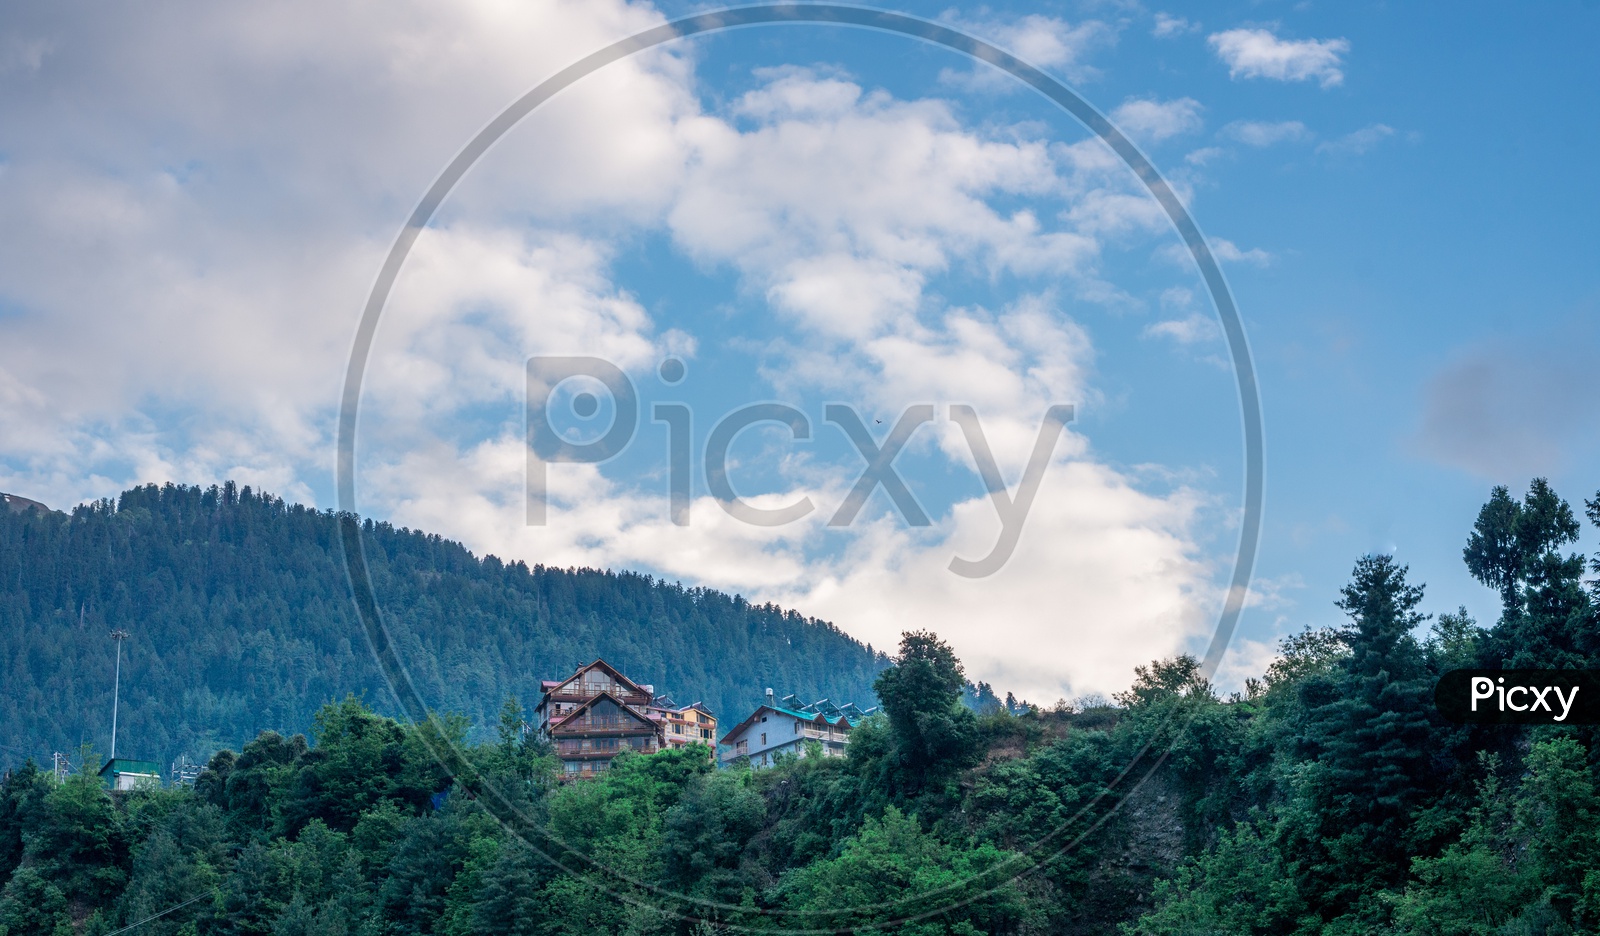 Landscape of Manali with wooden houses